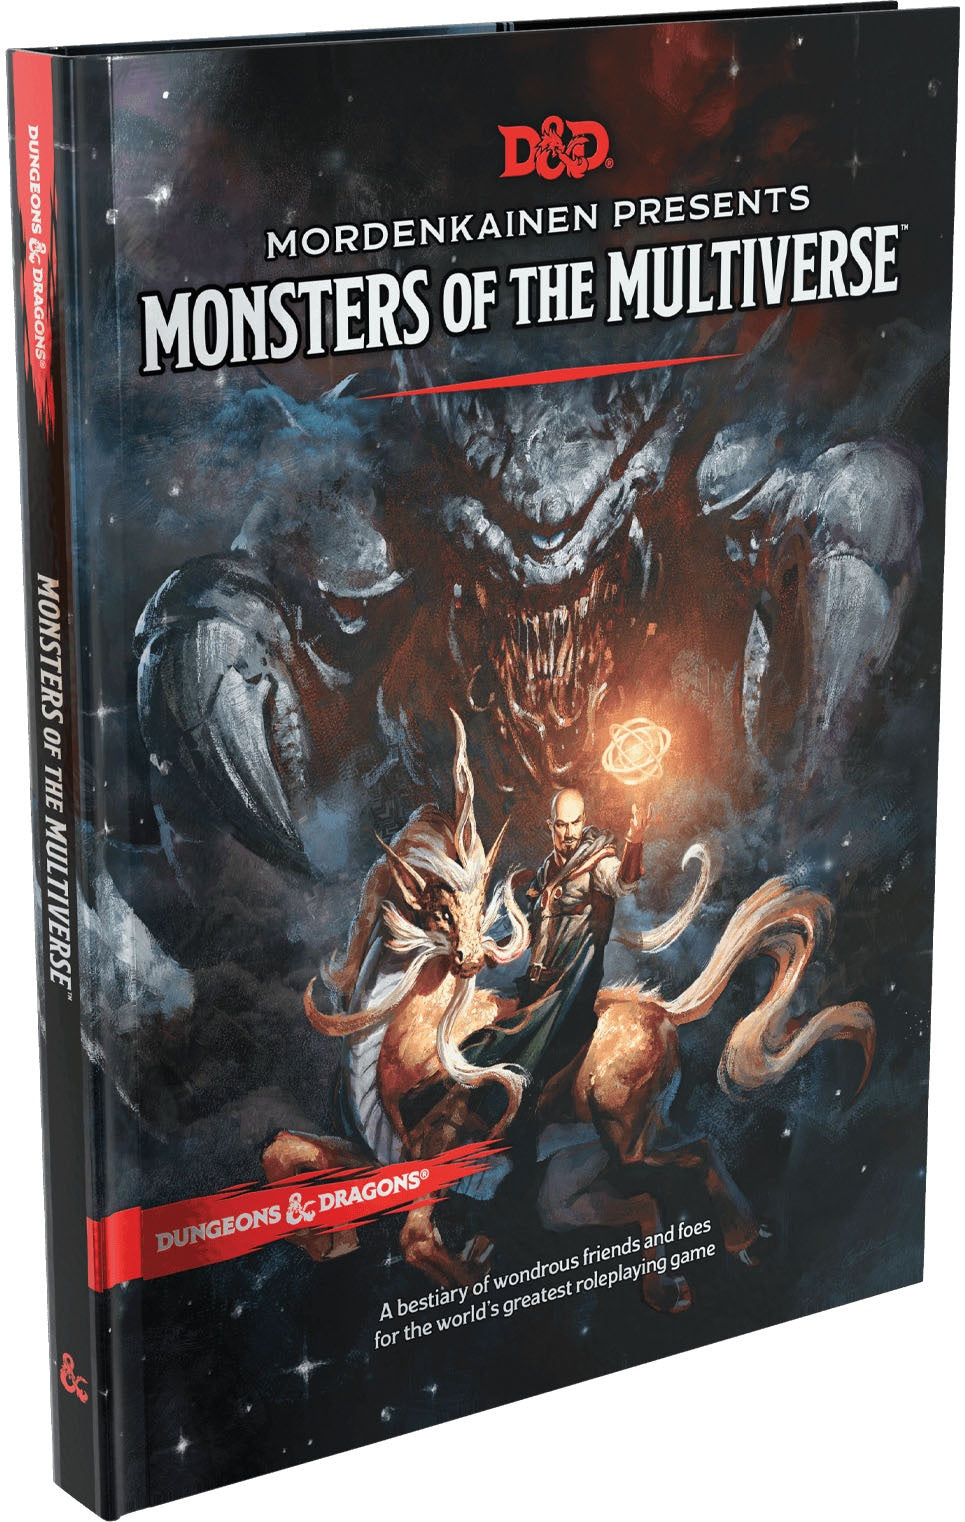 Dungeons & Dragons RPG: Mordenkainen Presents - Monsters of the Multiverse Hard Cover